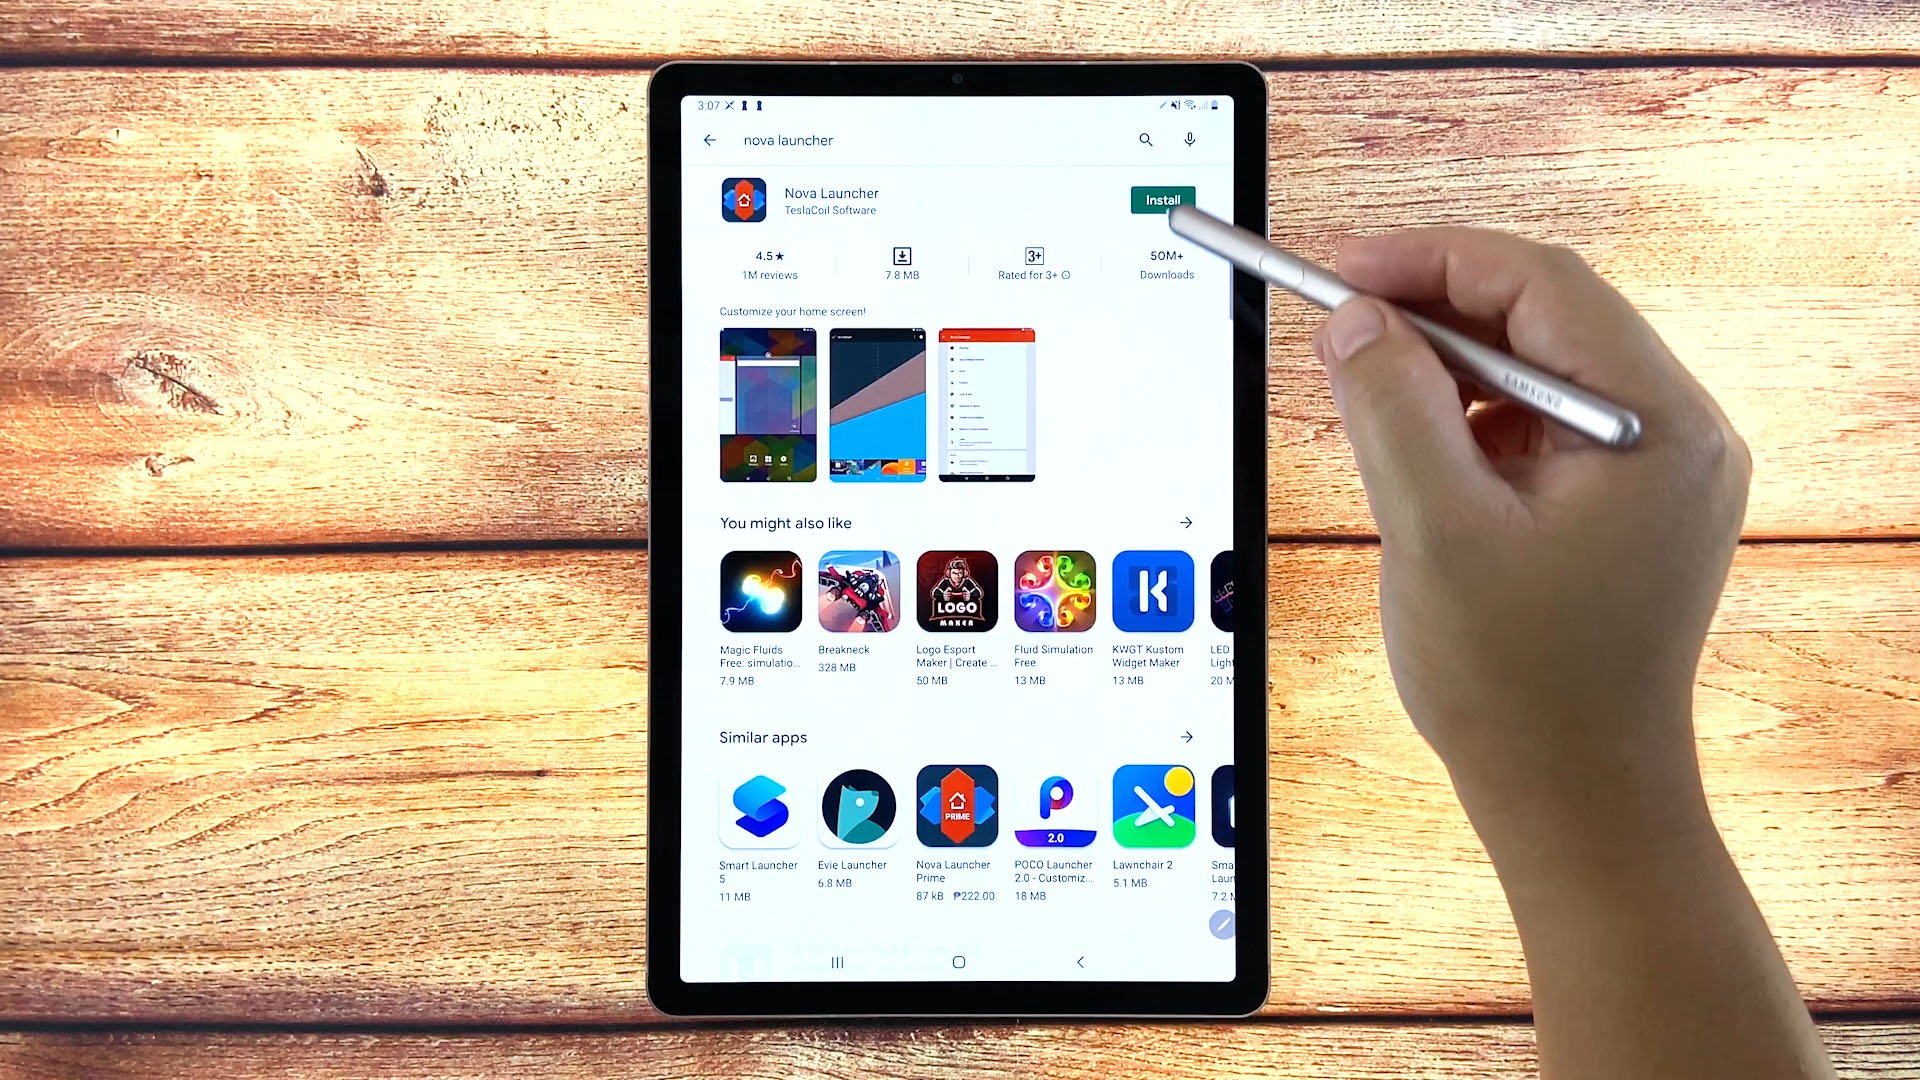 rename app icon tab s6 home screen-install